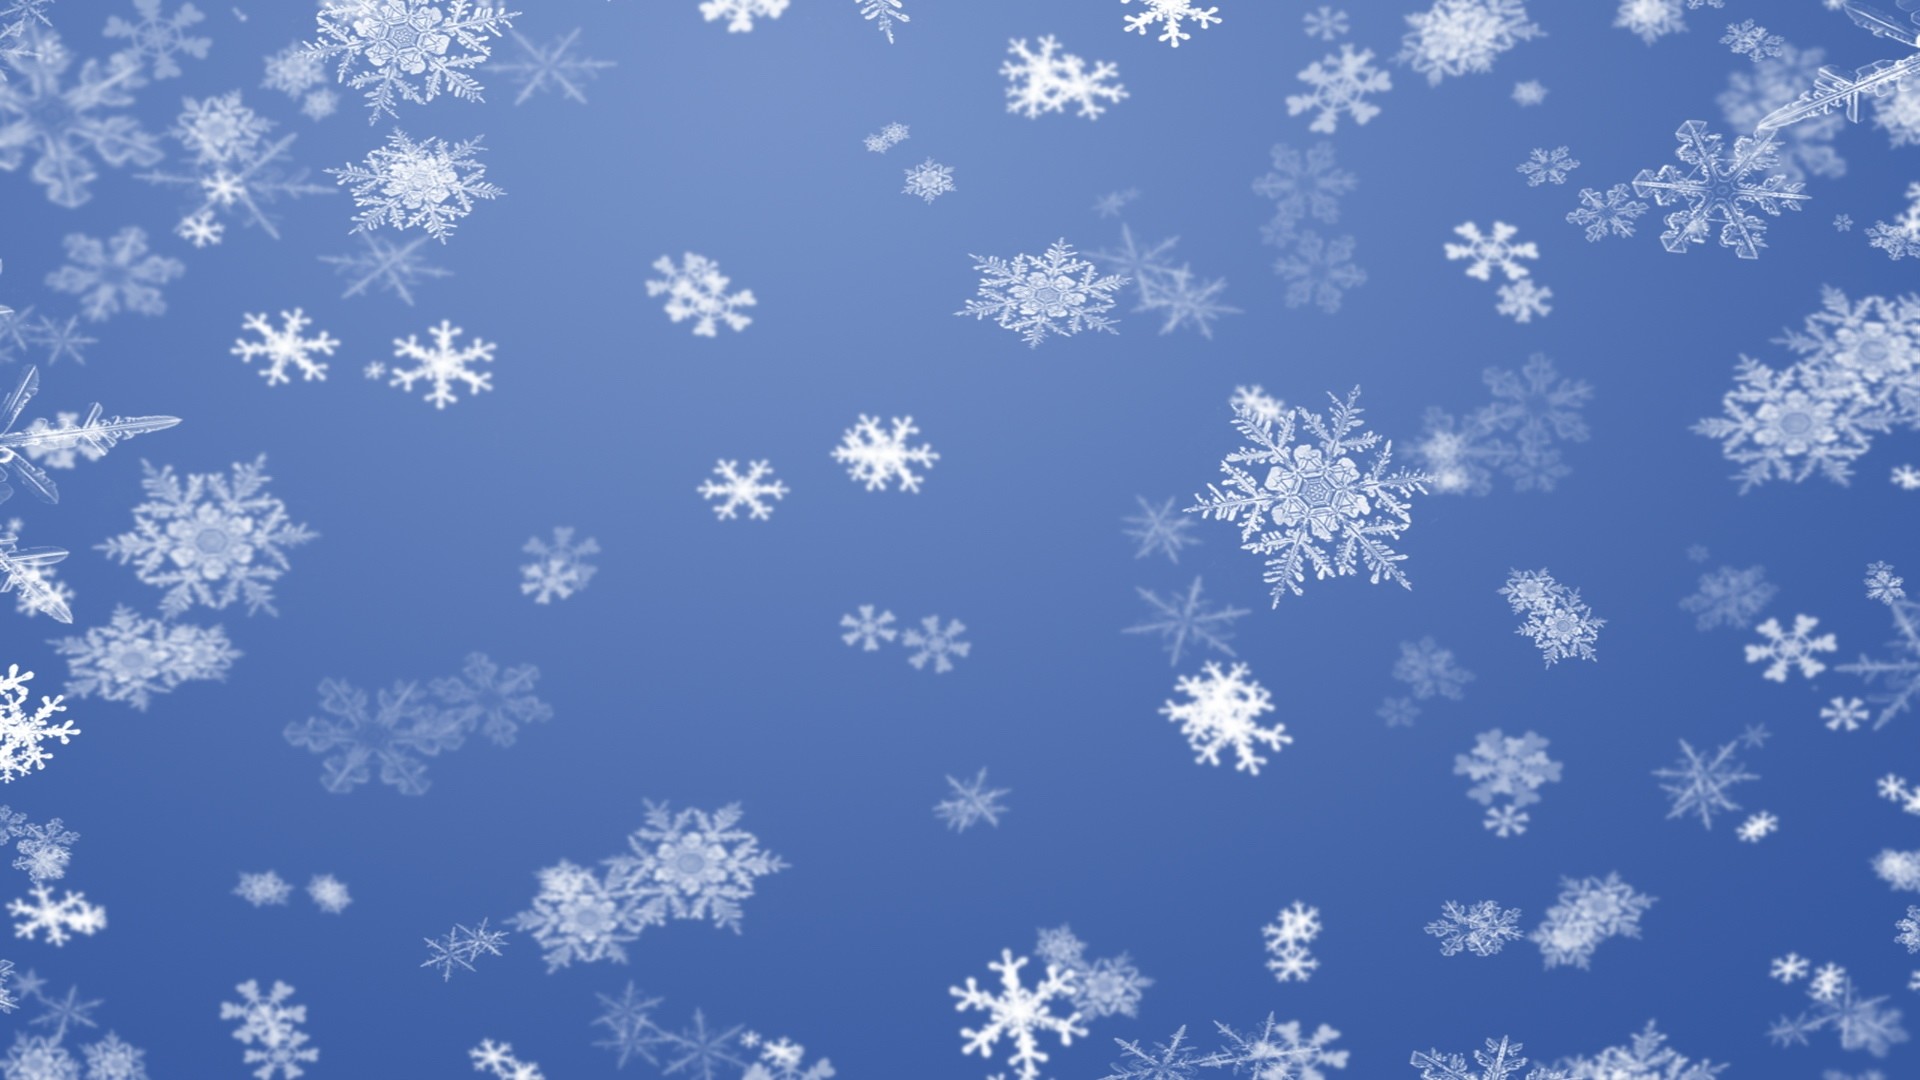 1920x1080 Original Resolution, Collection Of Christmas Snowflakes Wallpaper ...